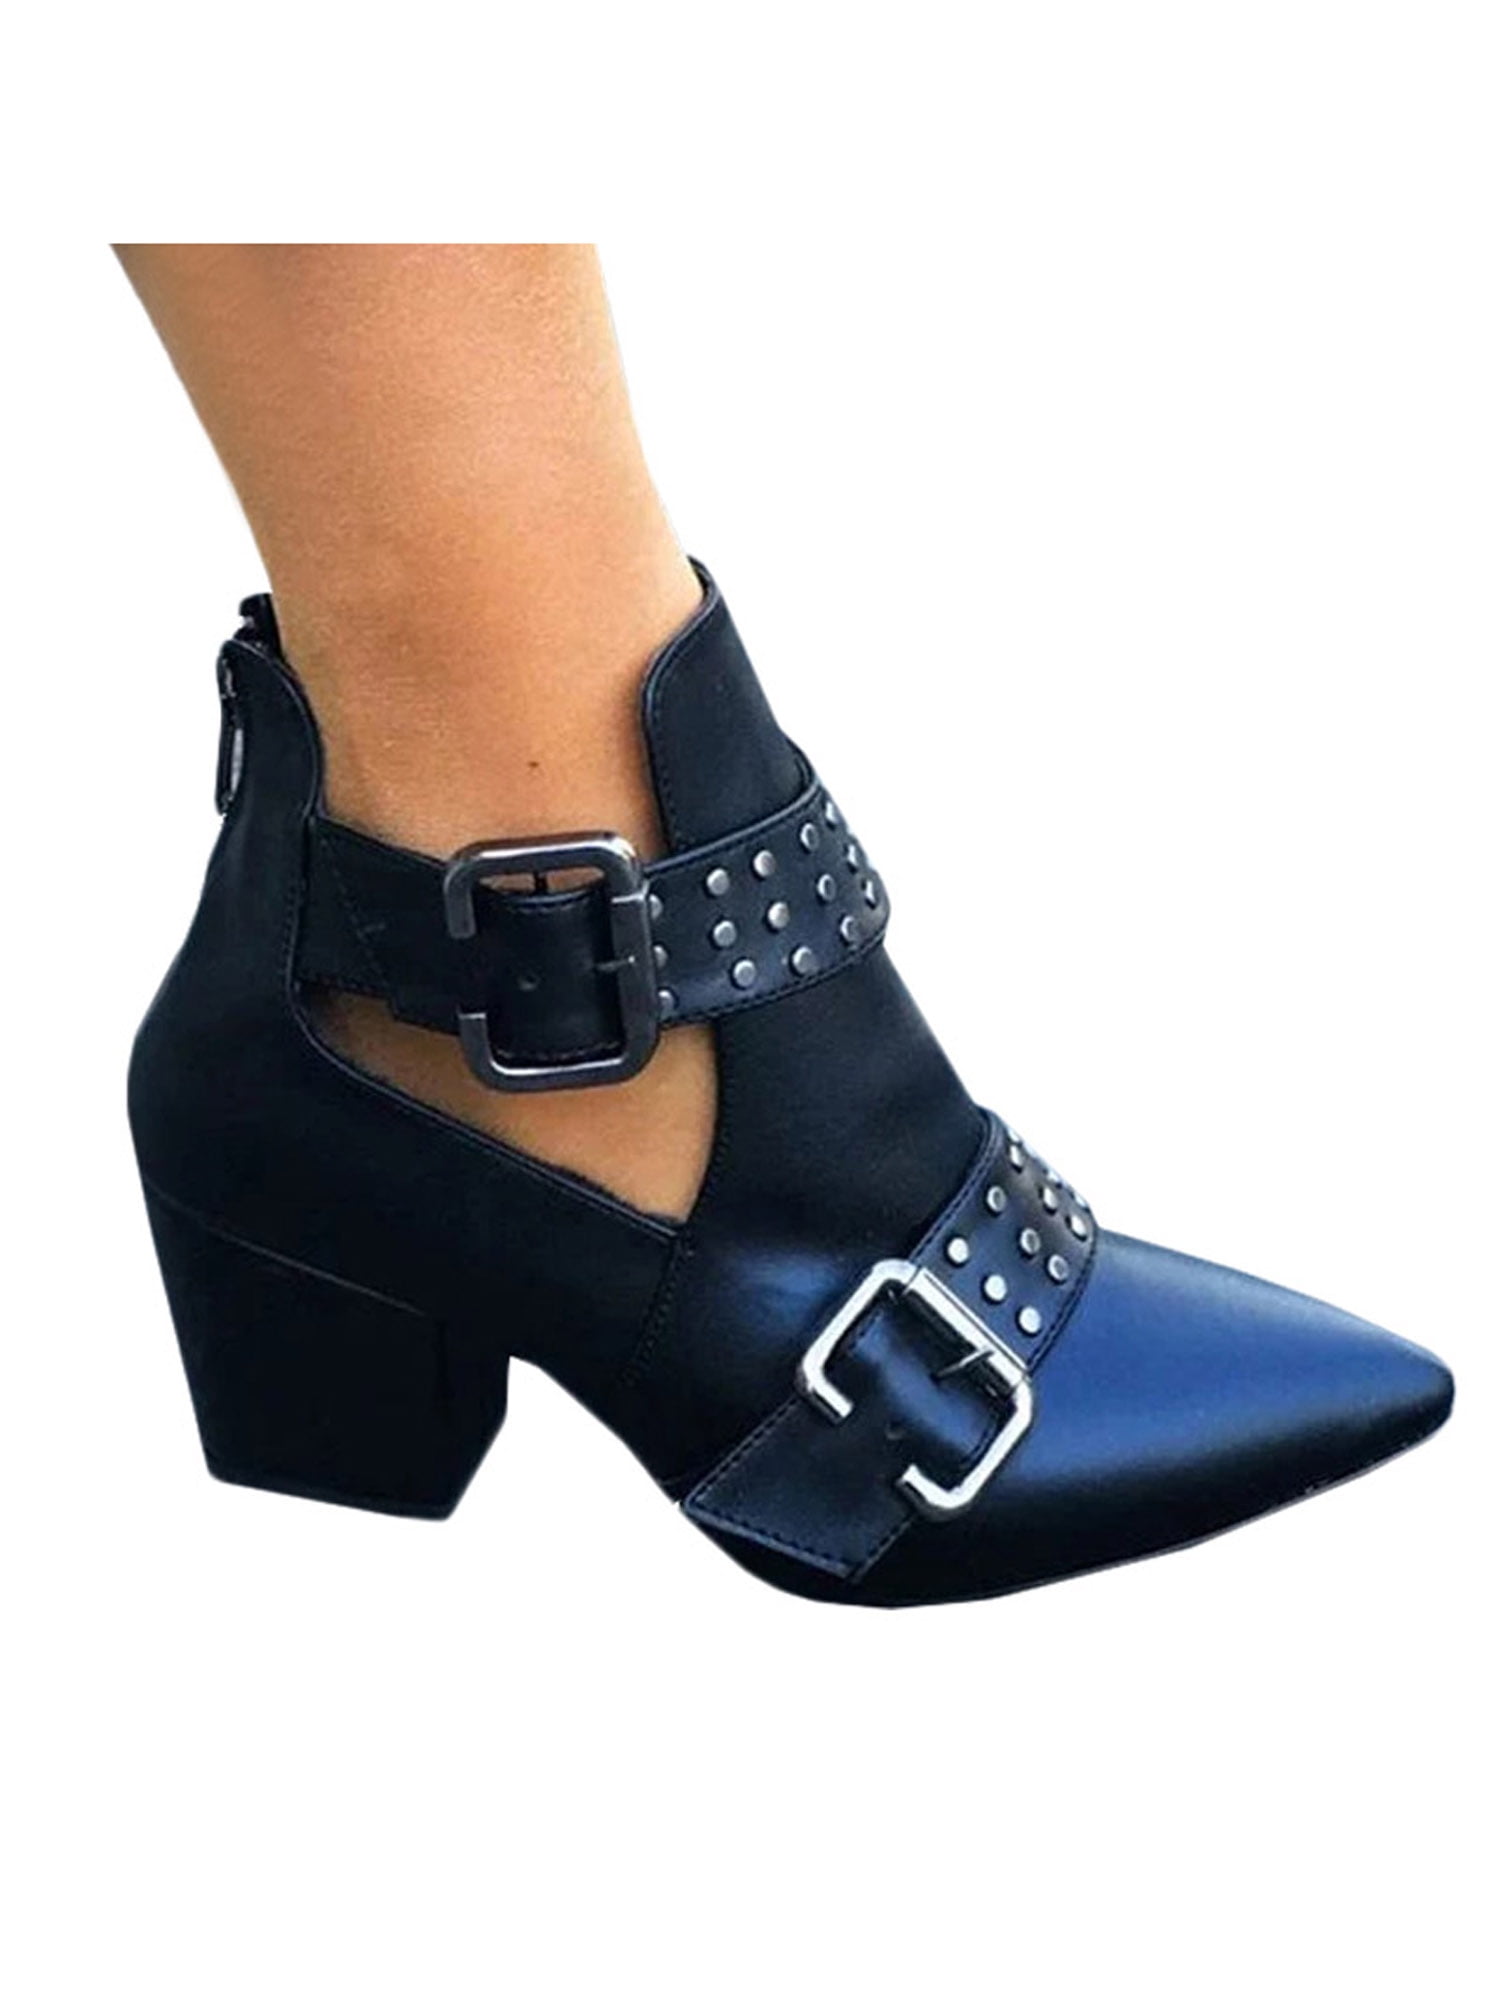 BIKETAFUWY Boots for Women Ankle Booties Cut Out Chunky Stacked Low Heel Boots Back Zipper Buckle Strap Shoes 